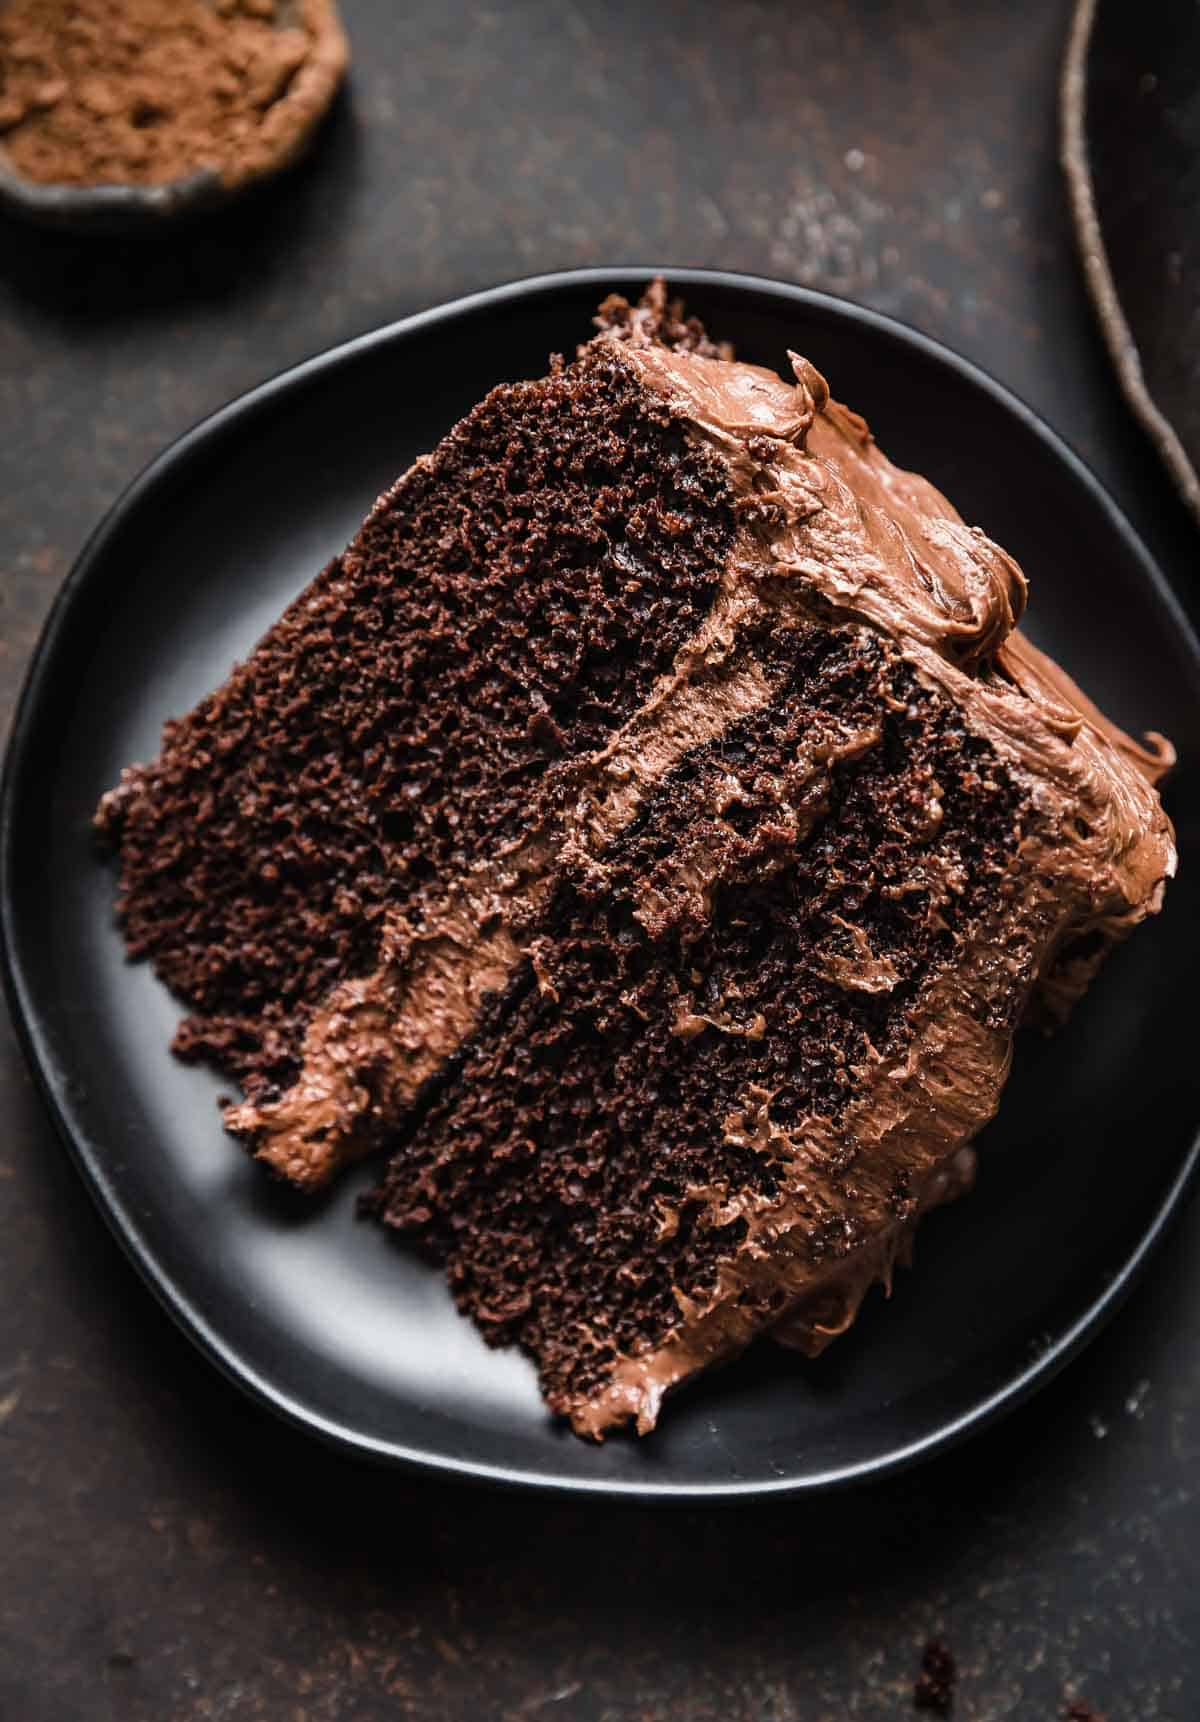 Two layer chocolate cake with a decadent chocolate frosting, on a black round plate.